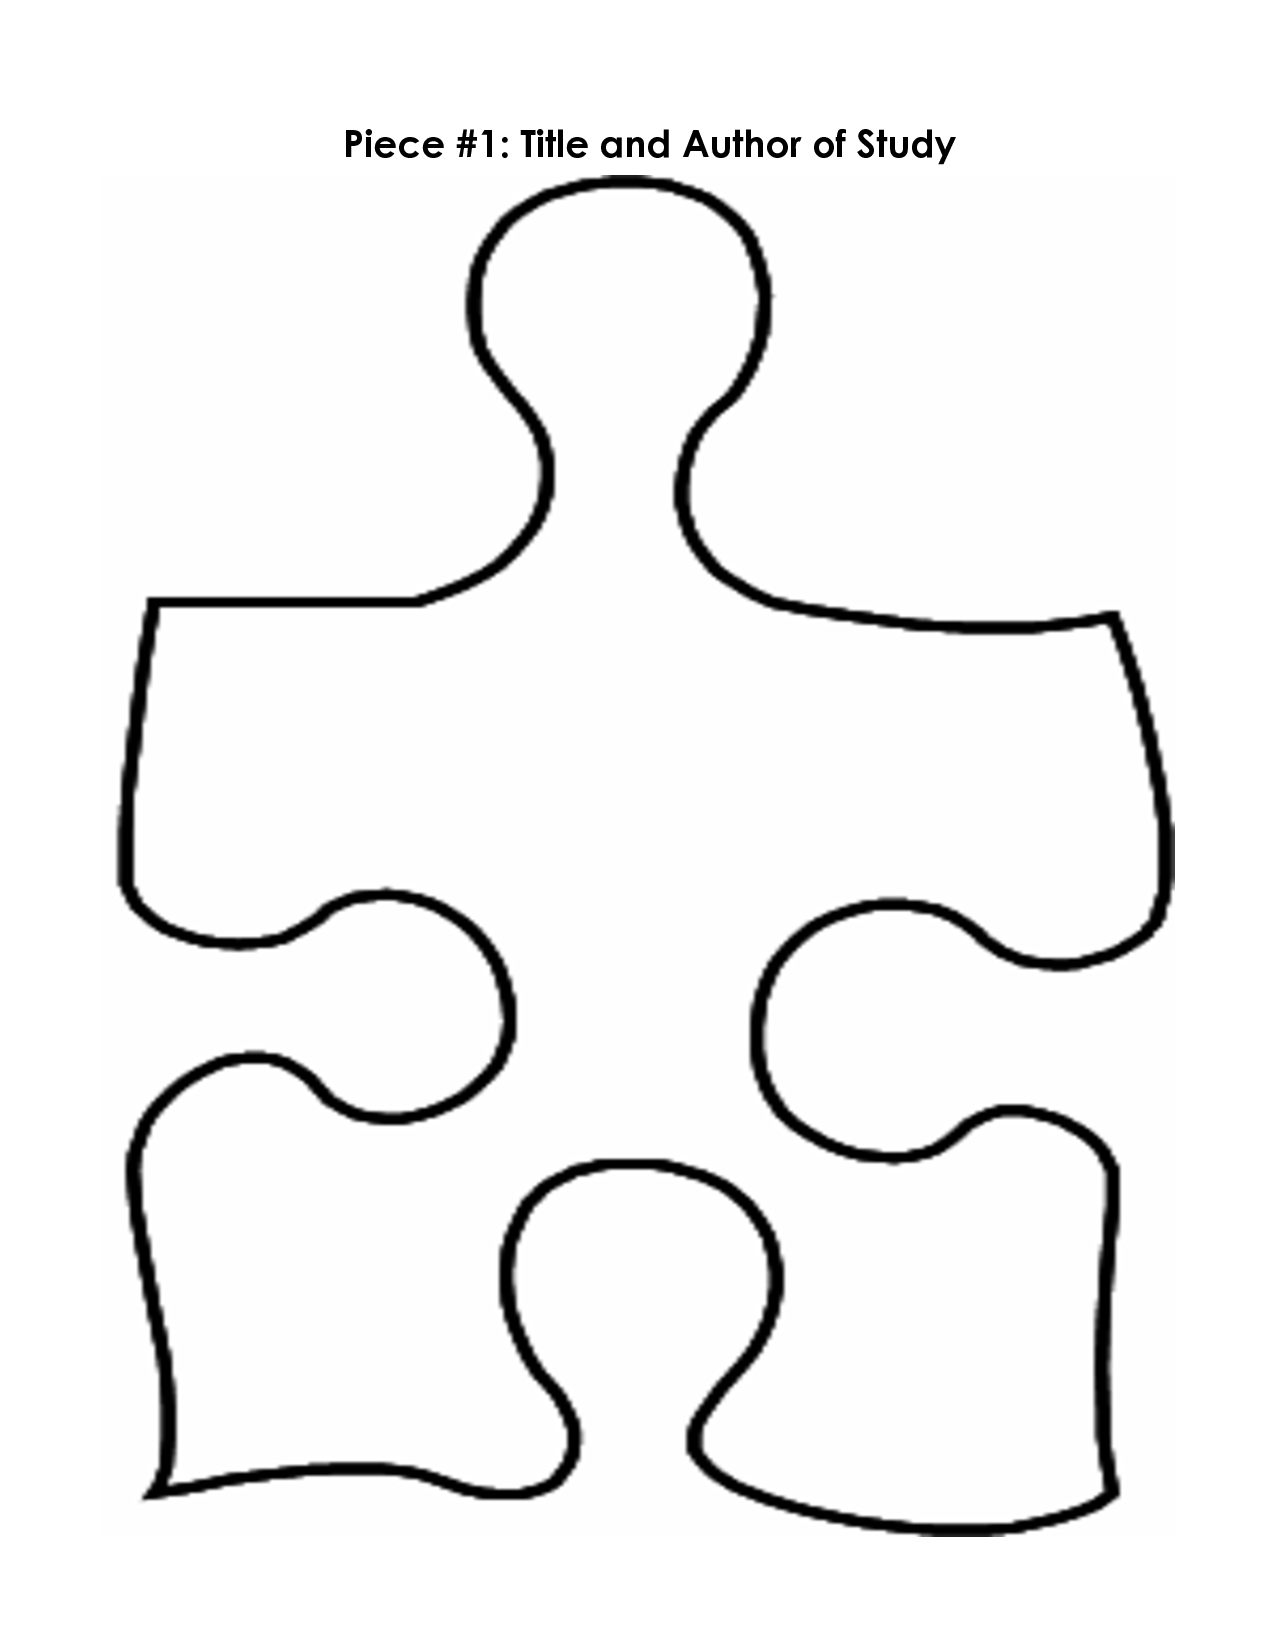 Free Puzzle Pieces Template, Download Free Clip Art, Free Clip Art - Printable Giant Puzzle